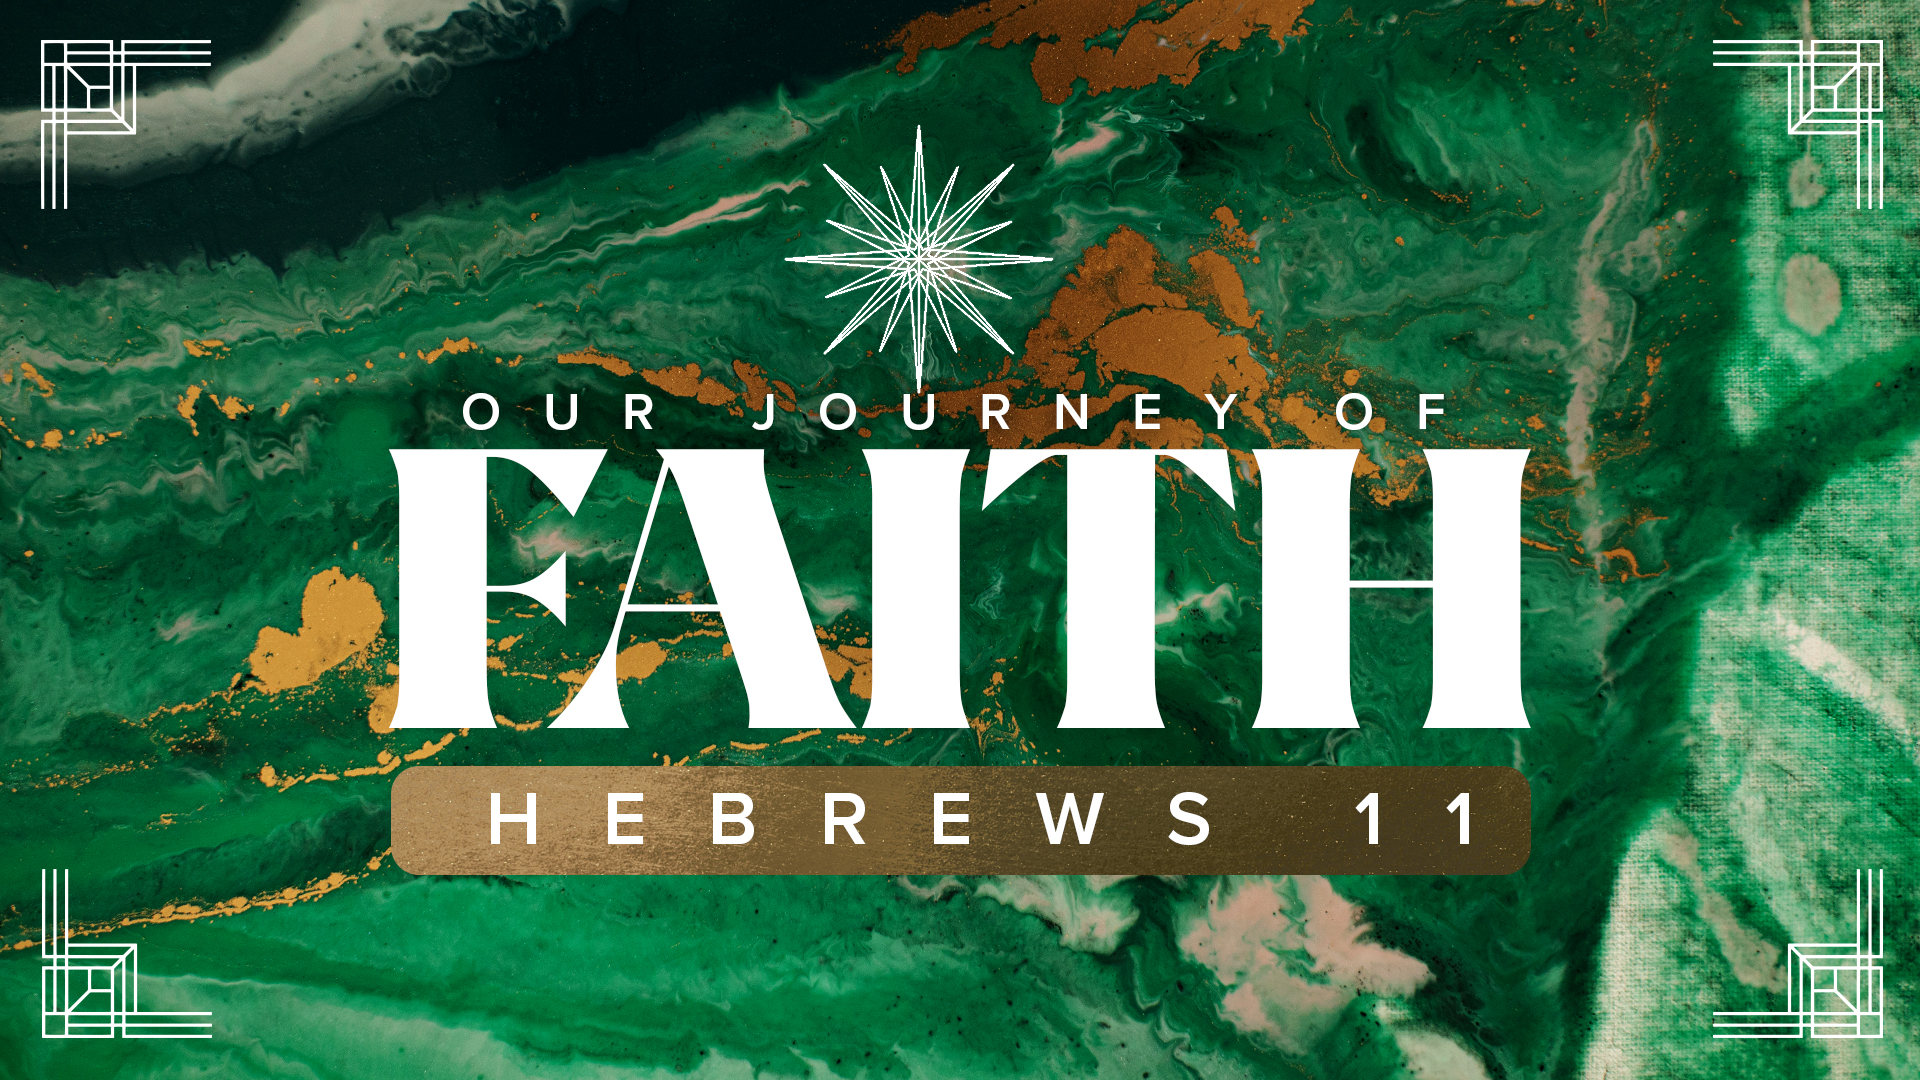 Hebrews 11:13-16 There Is No Place Like Home (Hebrews 11: Our Journey of Faith) Image